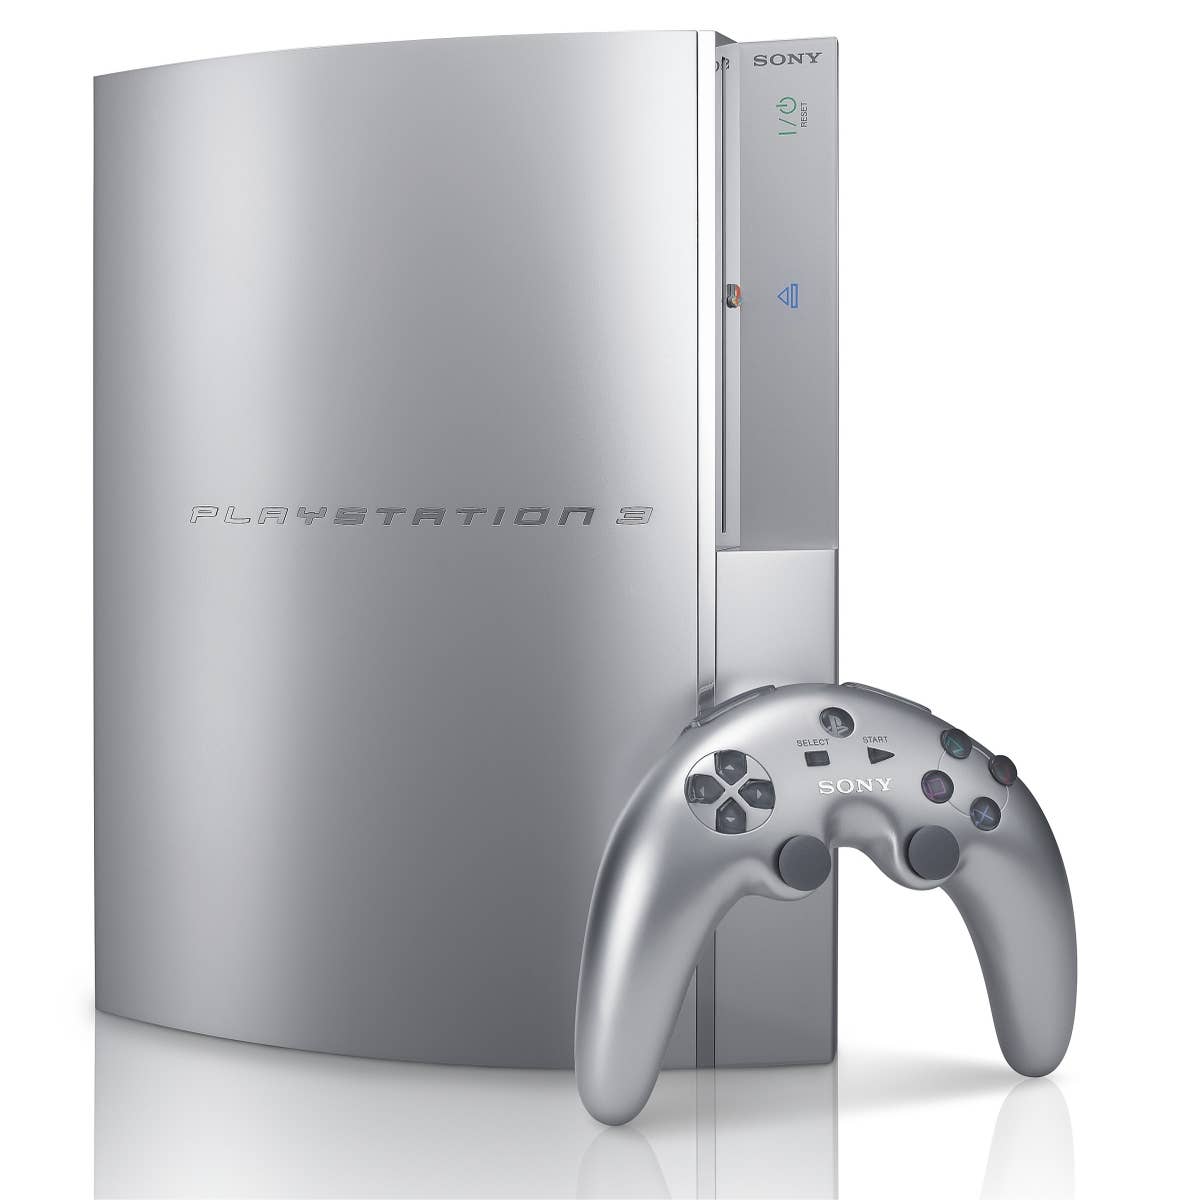 How to: Run all PS3 games on a PS3 with a non working Bluray drive